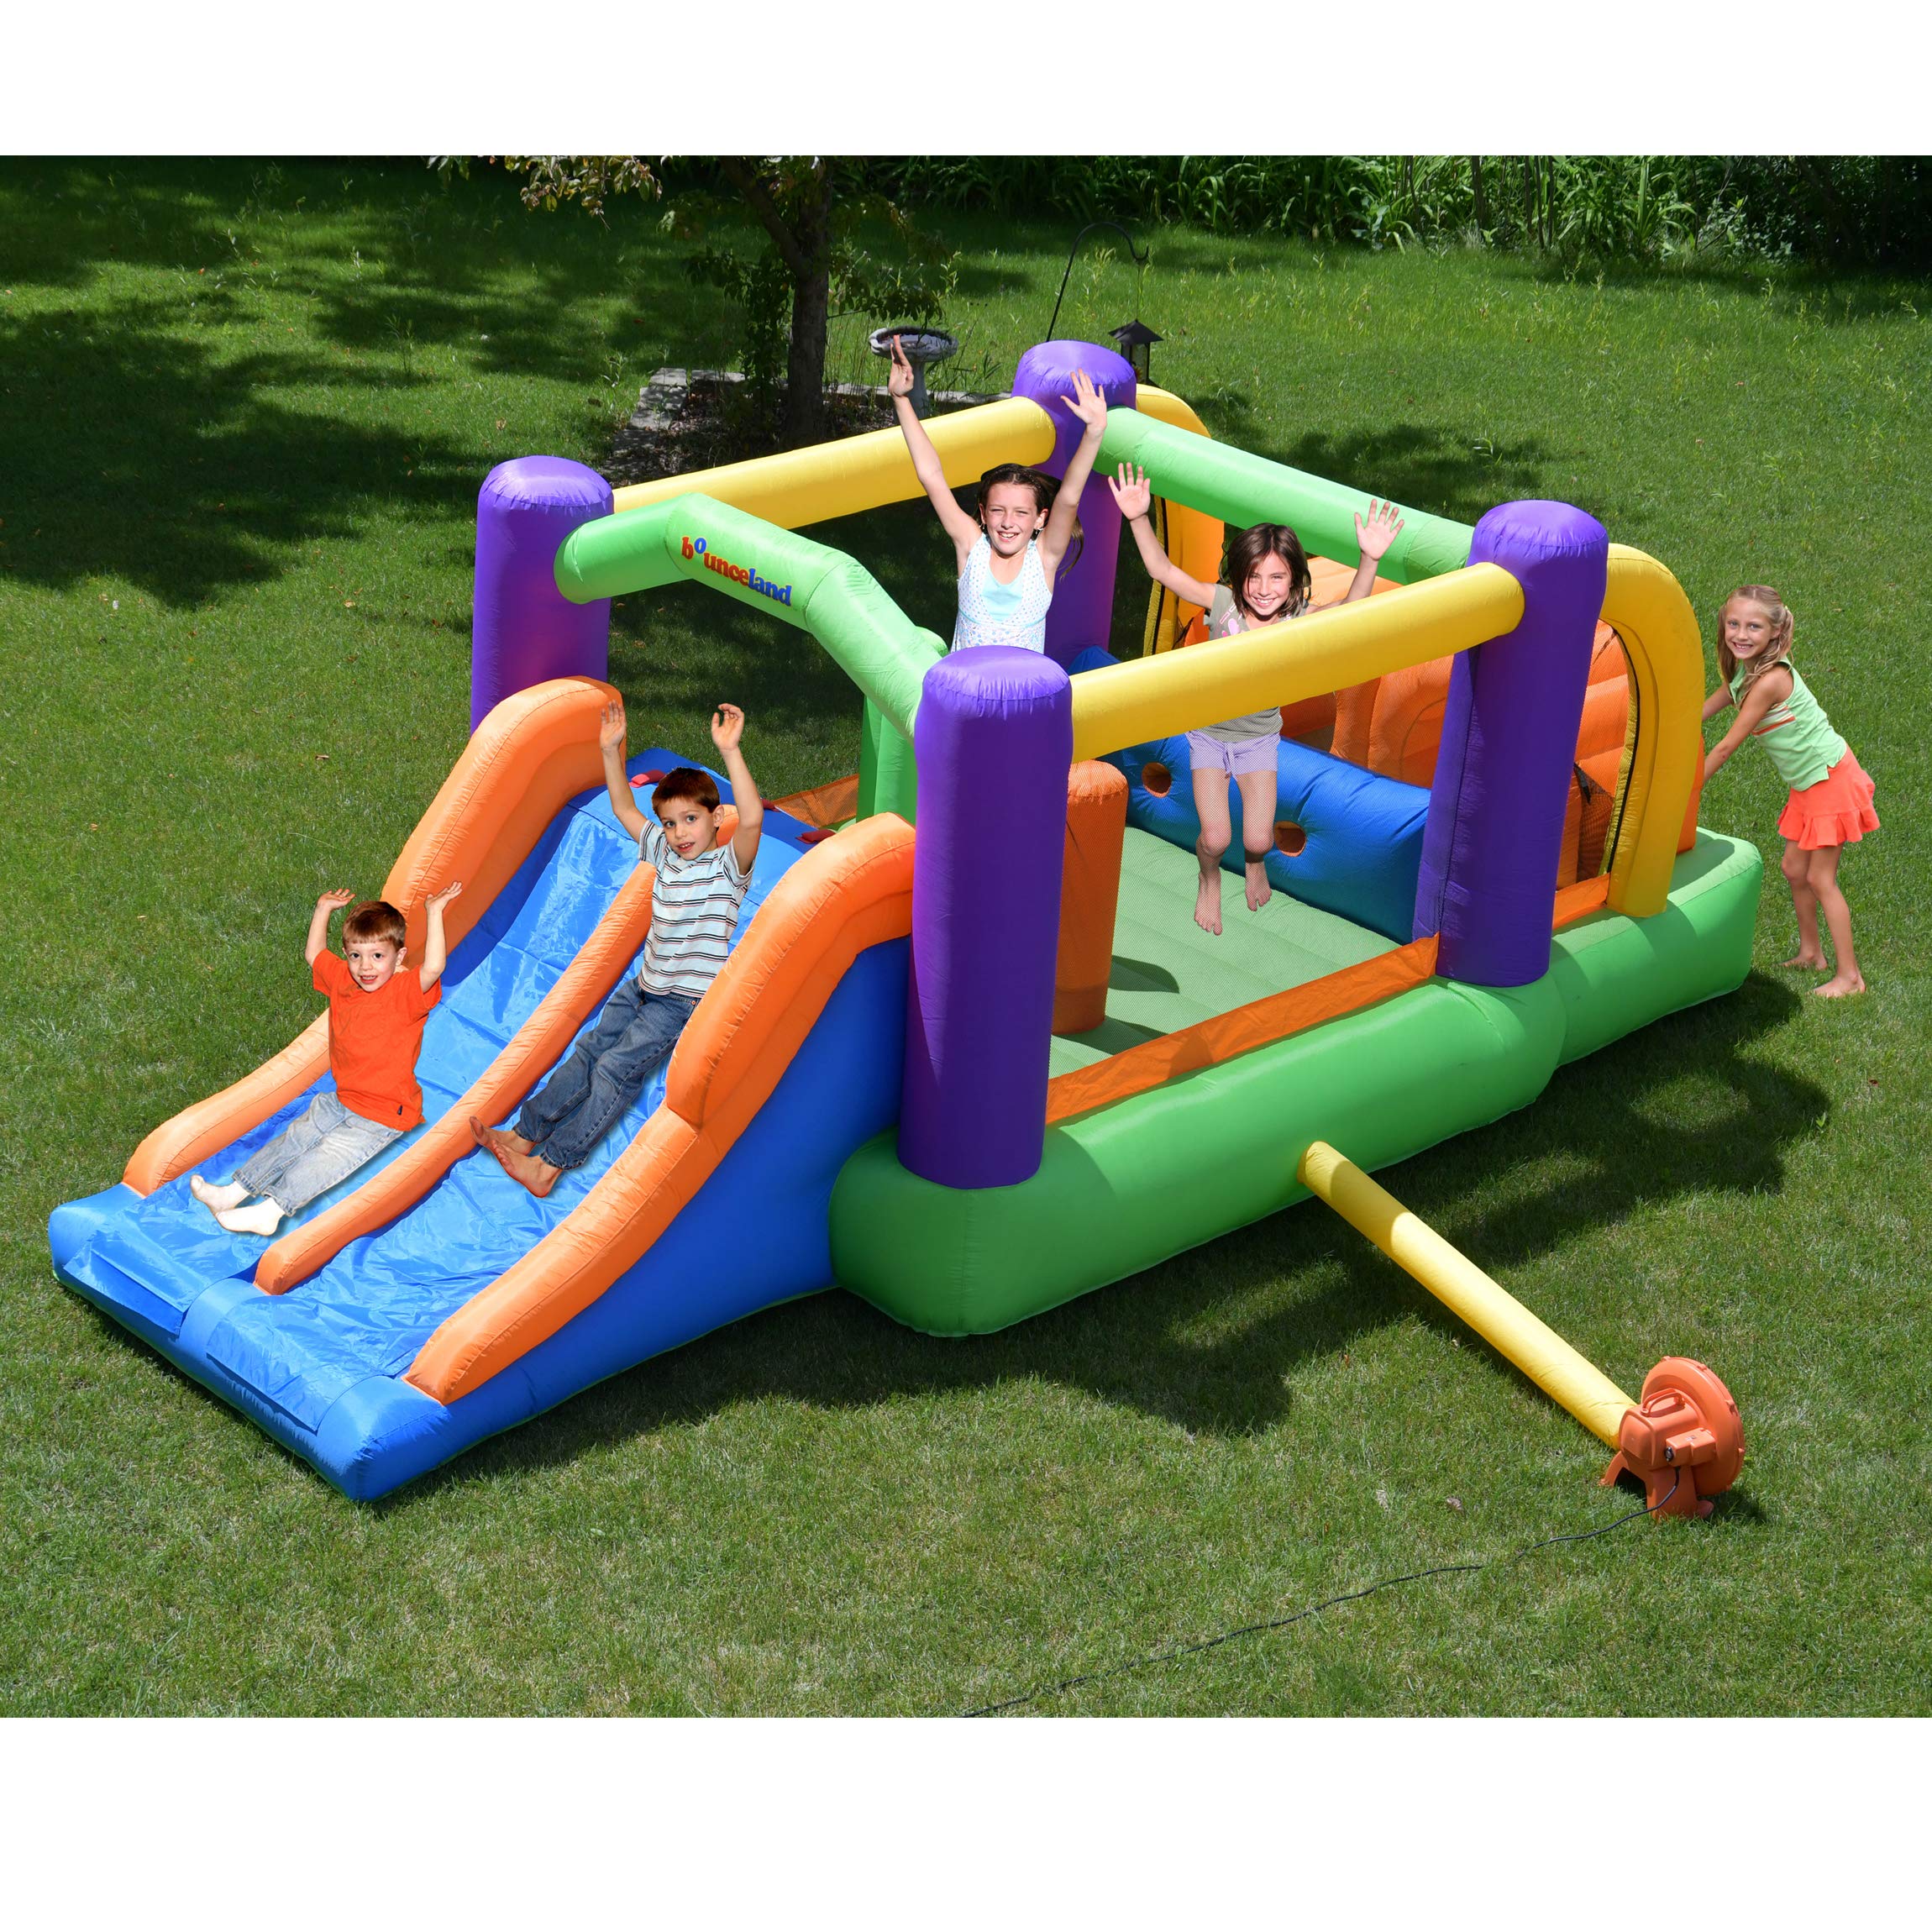 Bounceland Pro Racer Obstacle Bounce House with Dual Slides, Bounce, Climb, Slide All in One, UL 1 HP Blower Included, 19 ft x 9 ft x 7 ft H, Great for Big Party, Fun Racing Game in Teams